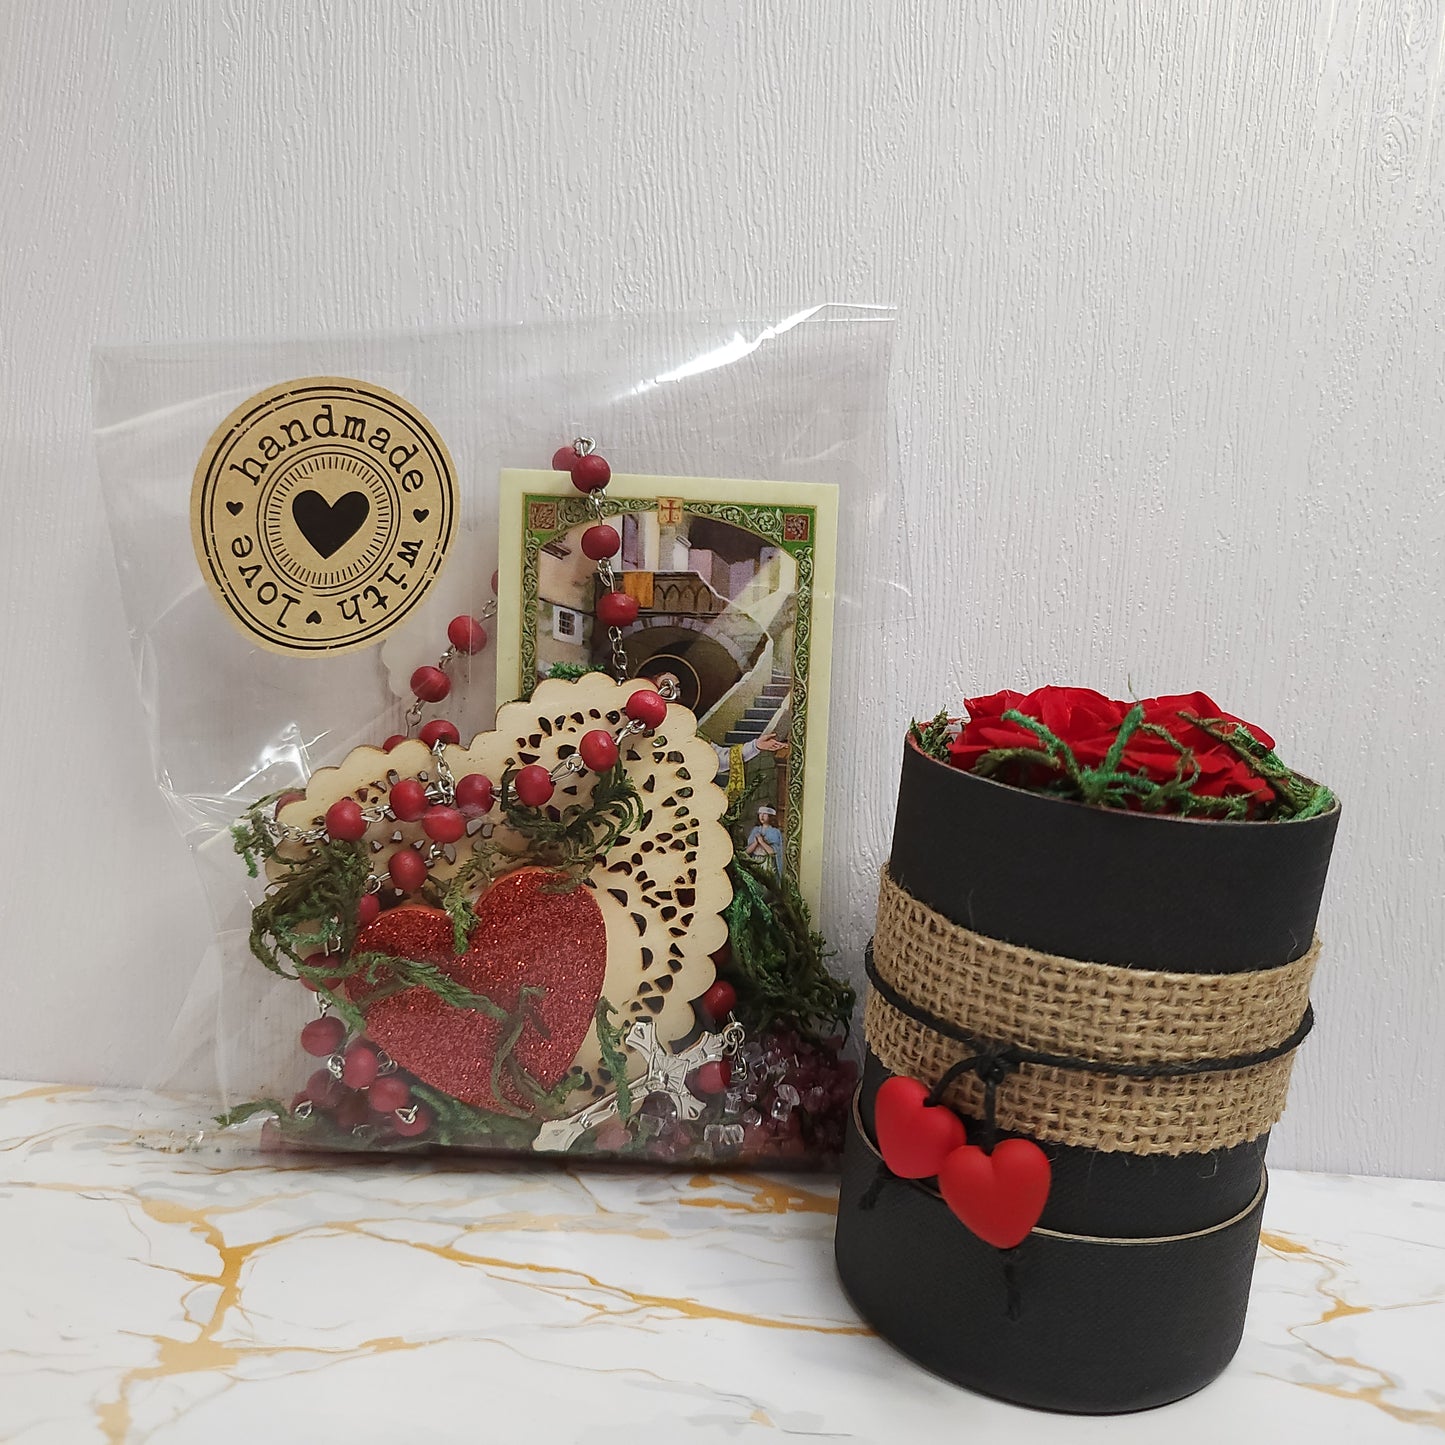 Saint Valentine Gift - Our Lady of Gifts